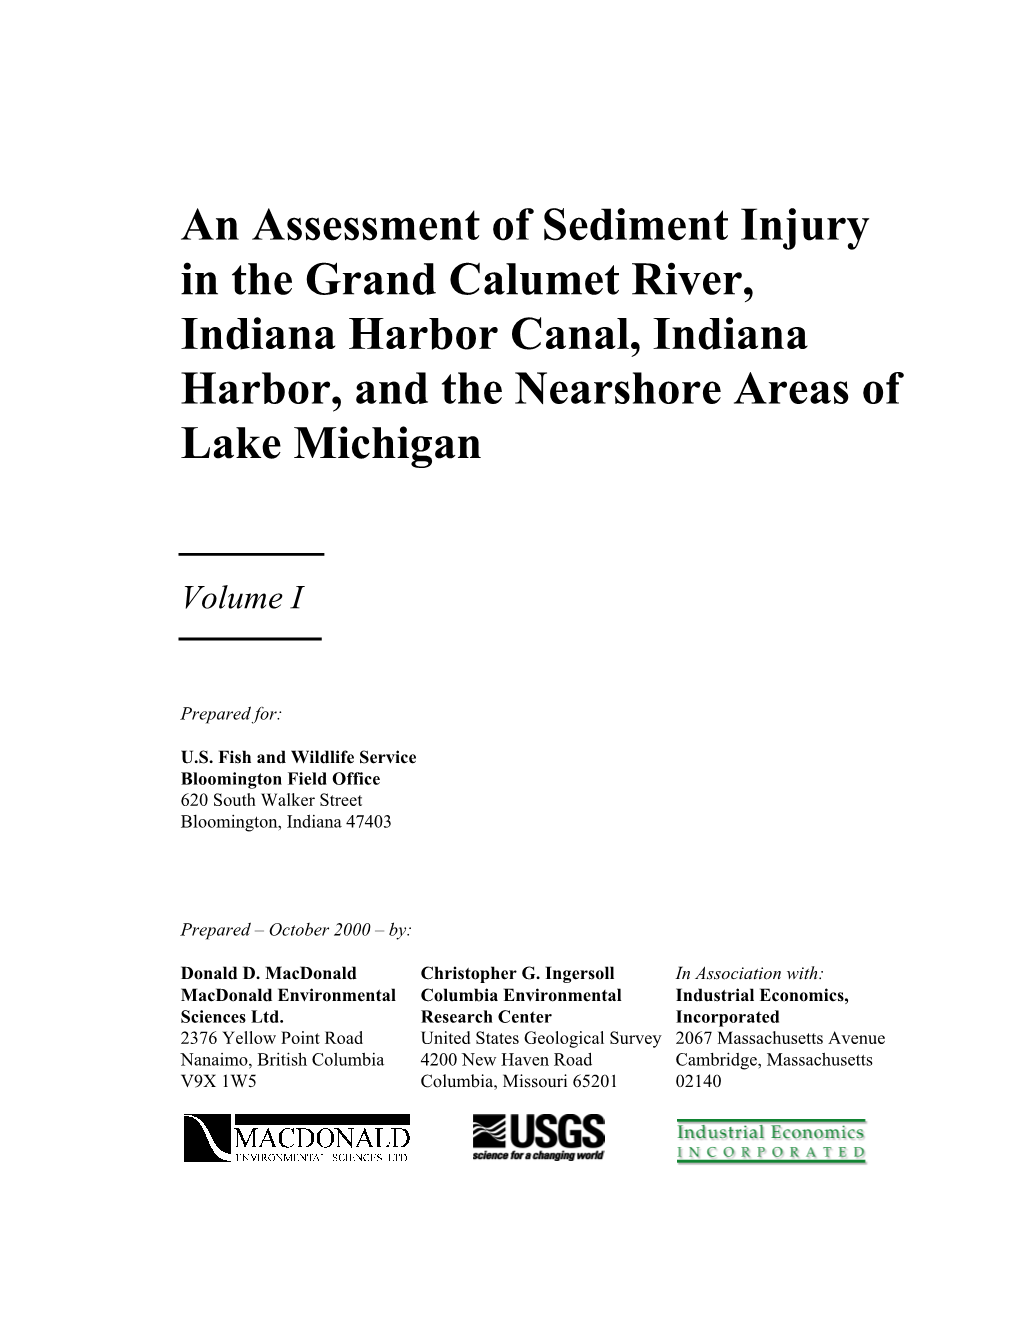 An Assessment of Sediment Injury in the Grand Calumet River, Indiana Harbor Canal, Indiana Harbor, and the Nearshore Areas of Lake Michigan